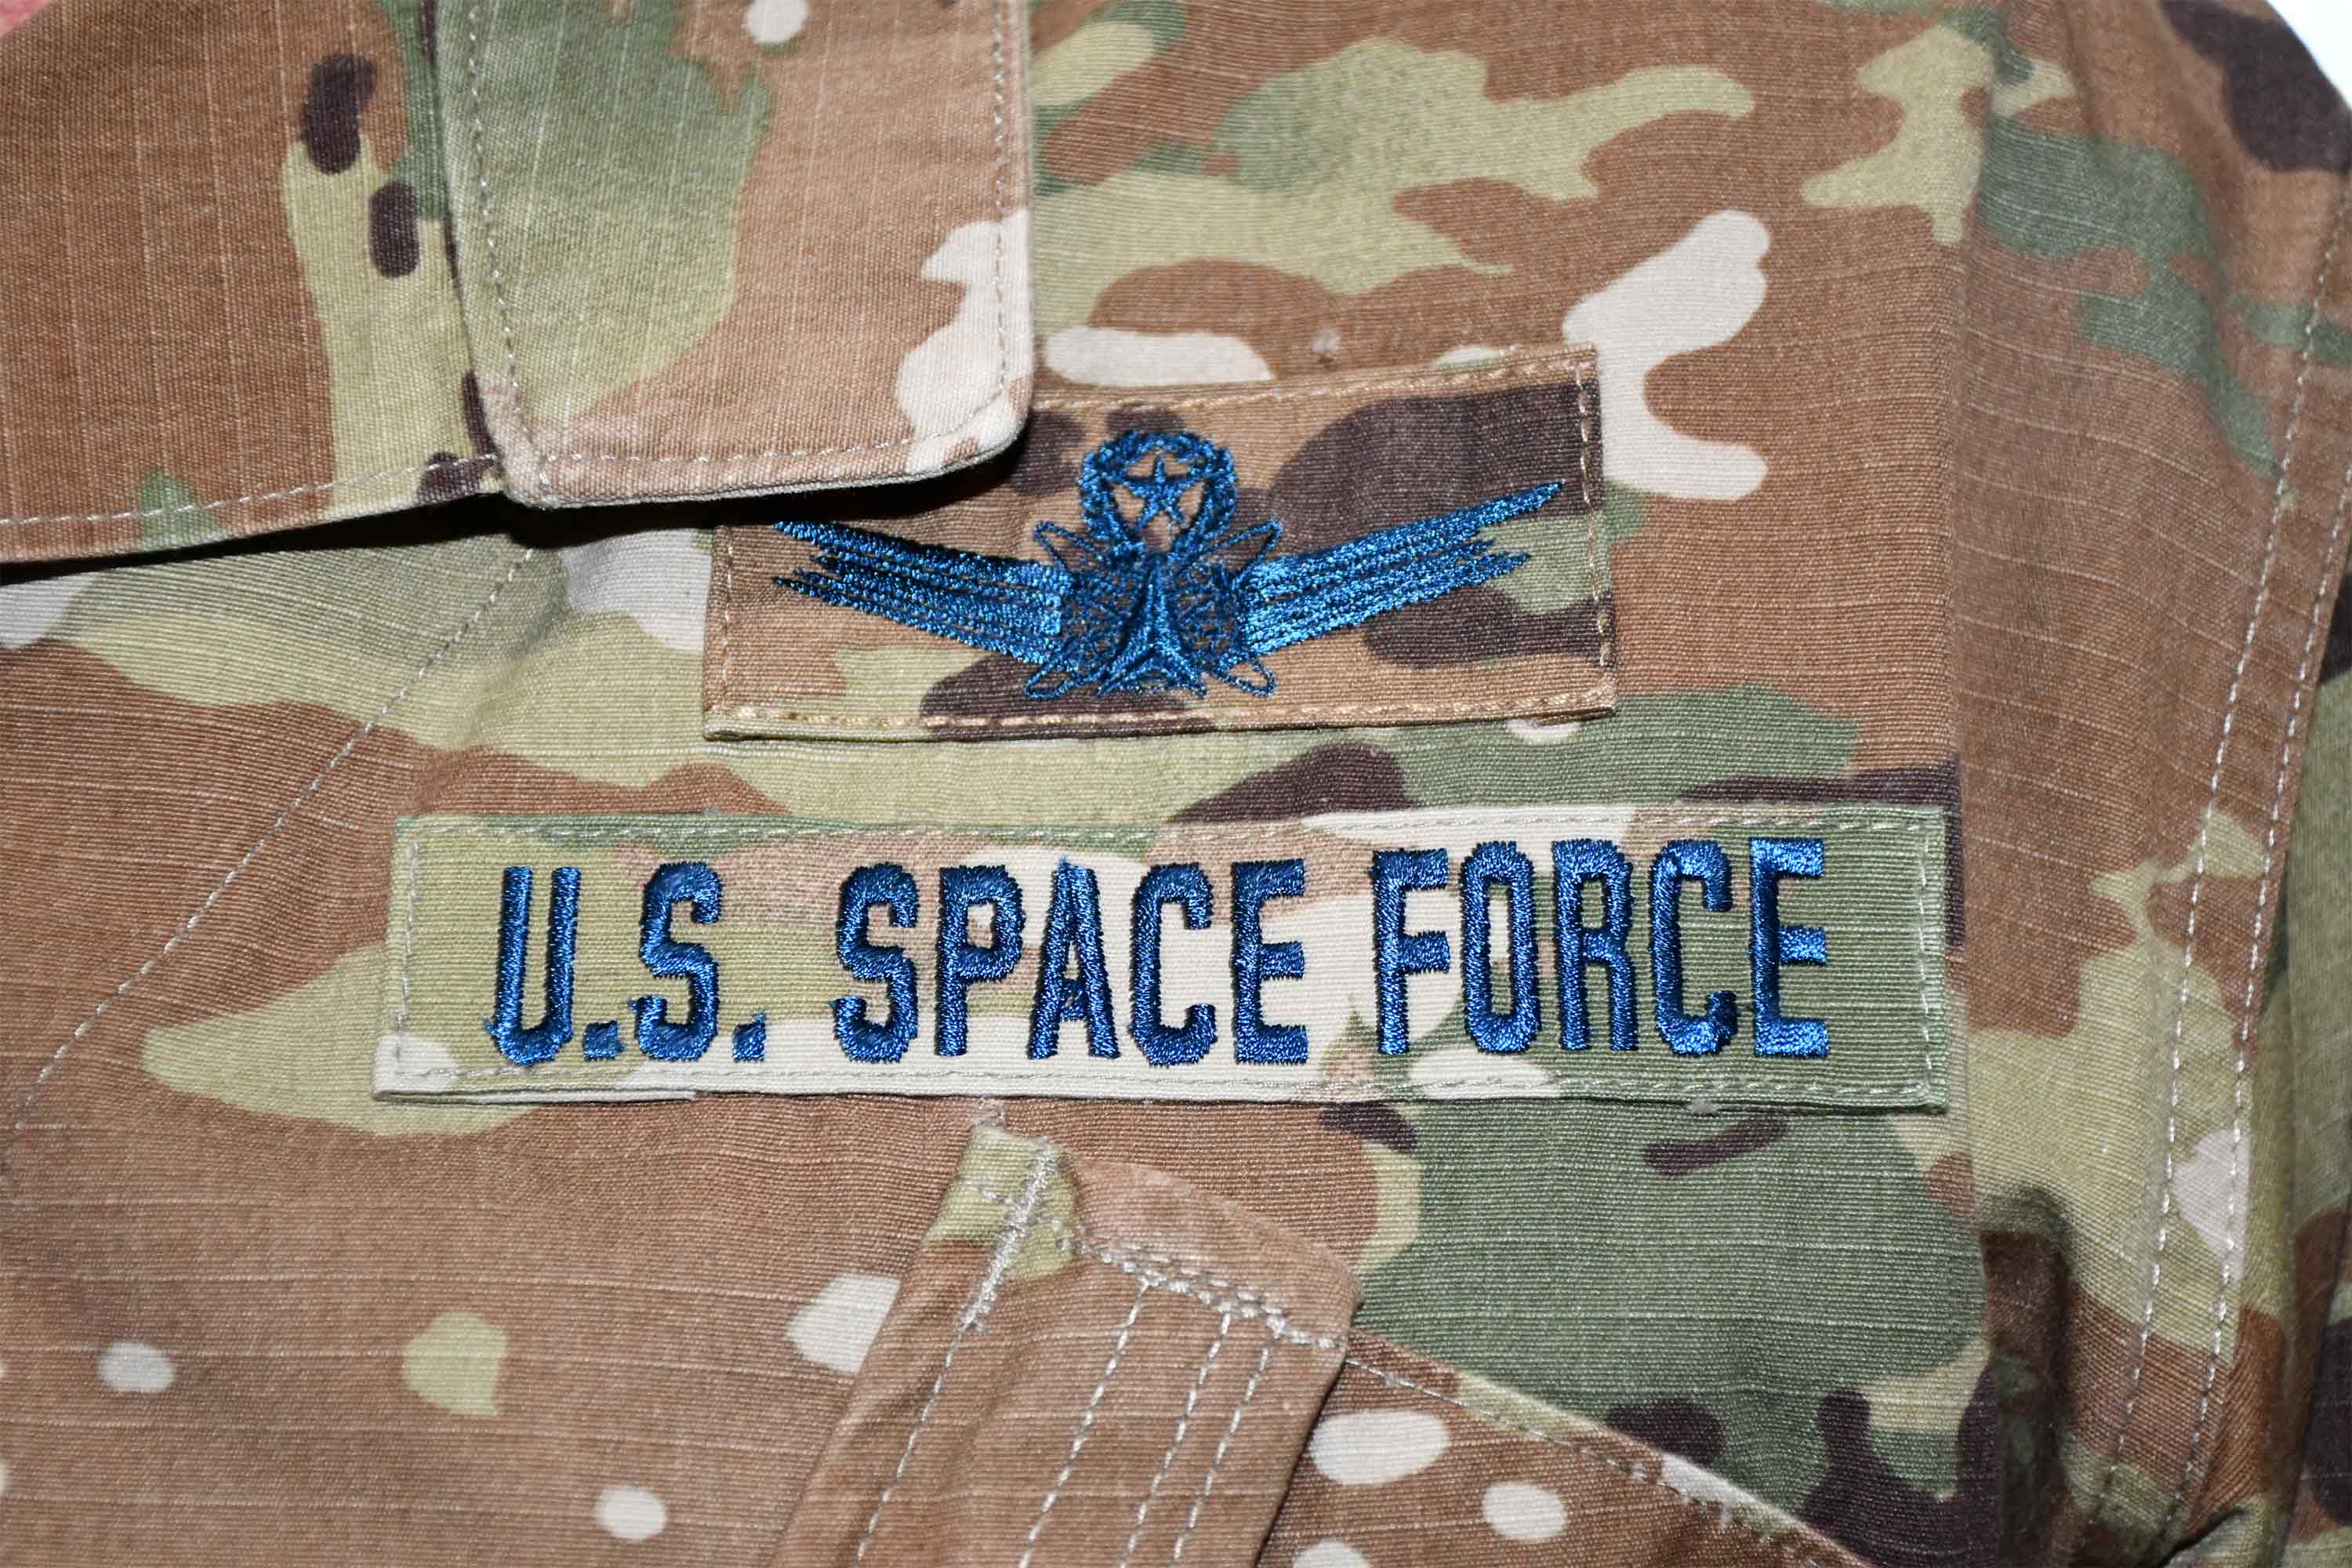 Airmen who transfer into the U.S. Space Force will continue to wear the OCP utility uniform, but with blue thread and a colored U.S. flag.